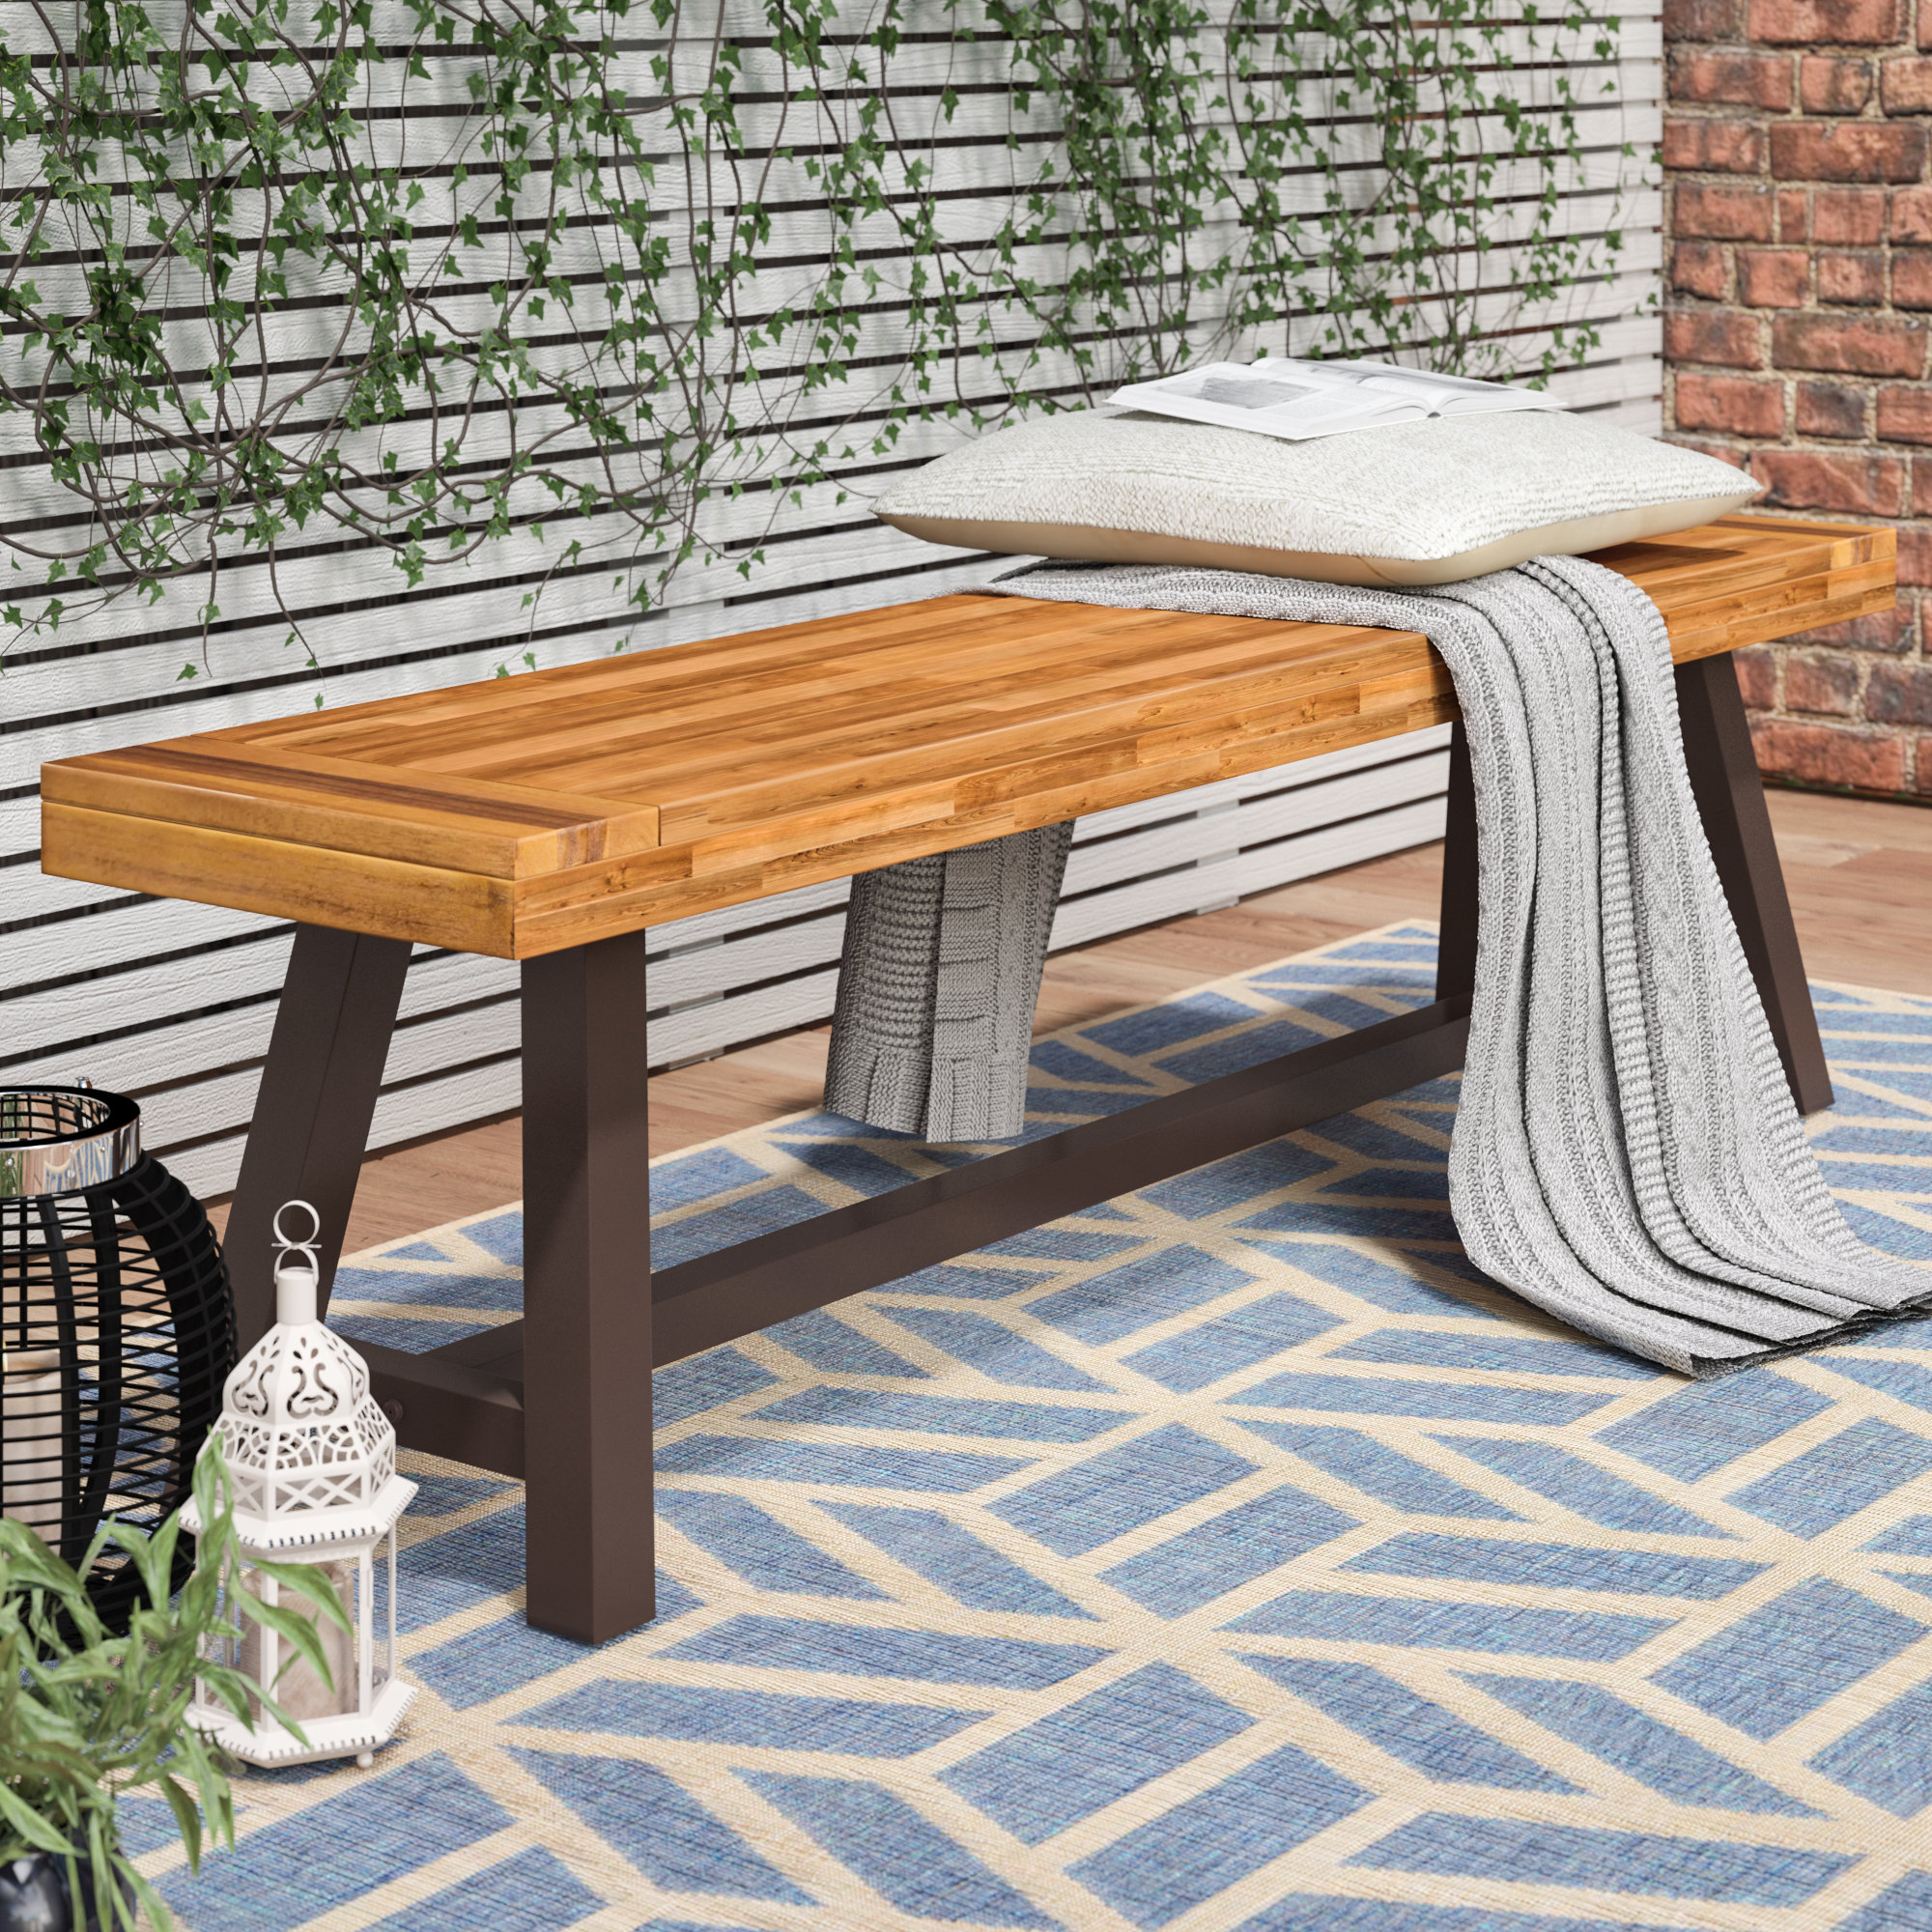 World Menagerie Levy Outdoor Wood Picnic Bench & Reviews | Wayfair